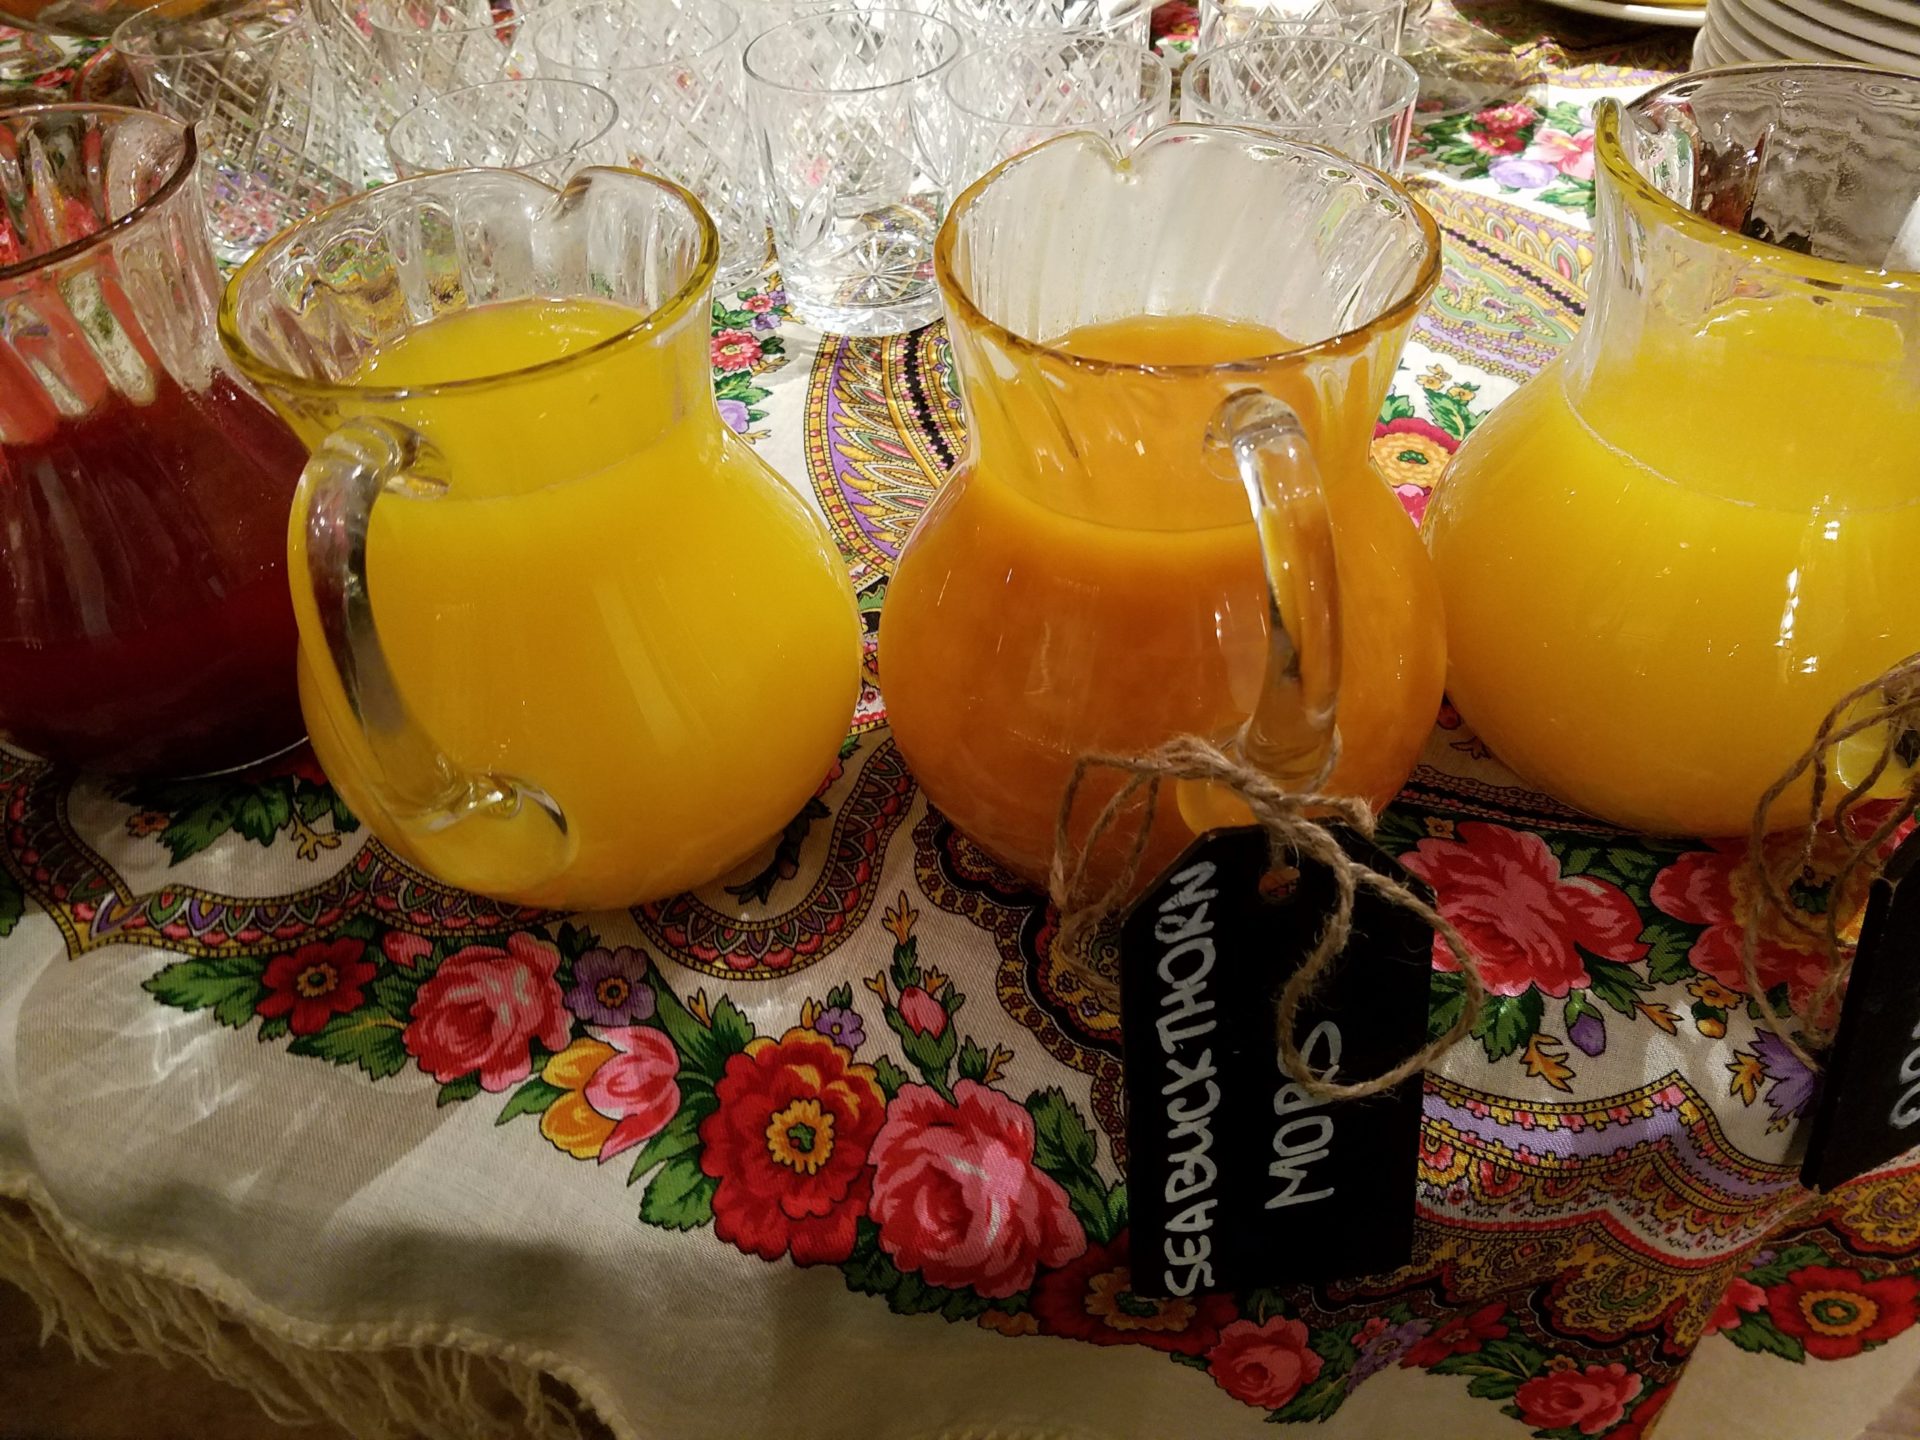 a group of glasses and pitcher of orange juice on a table